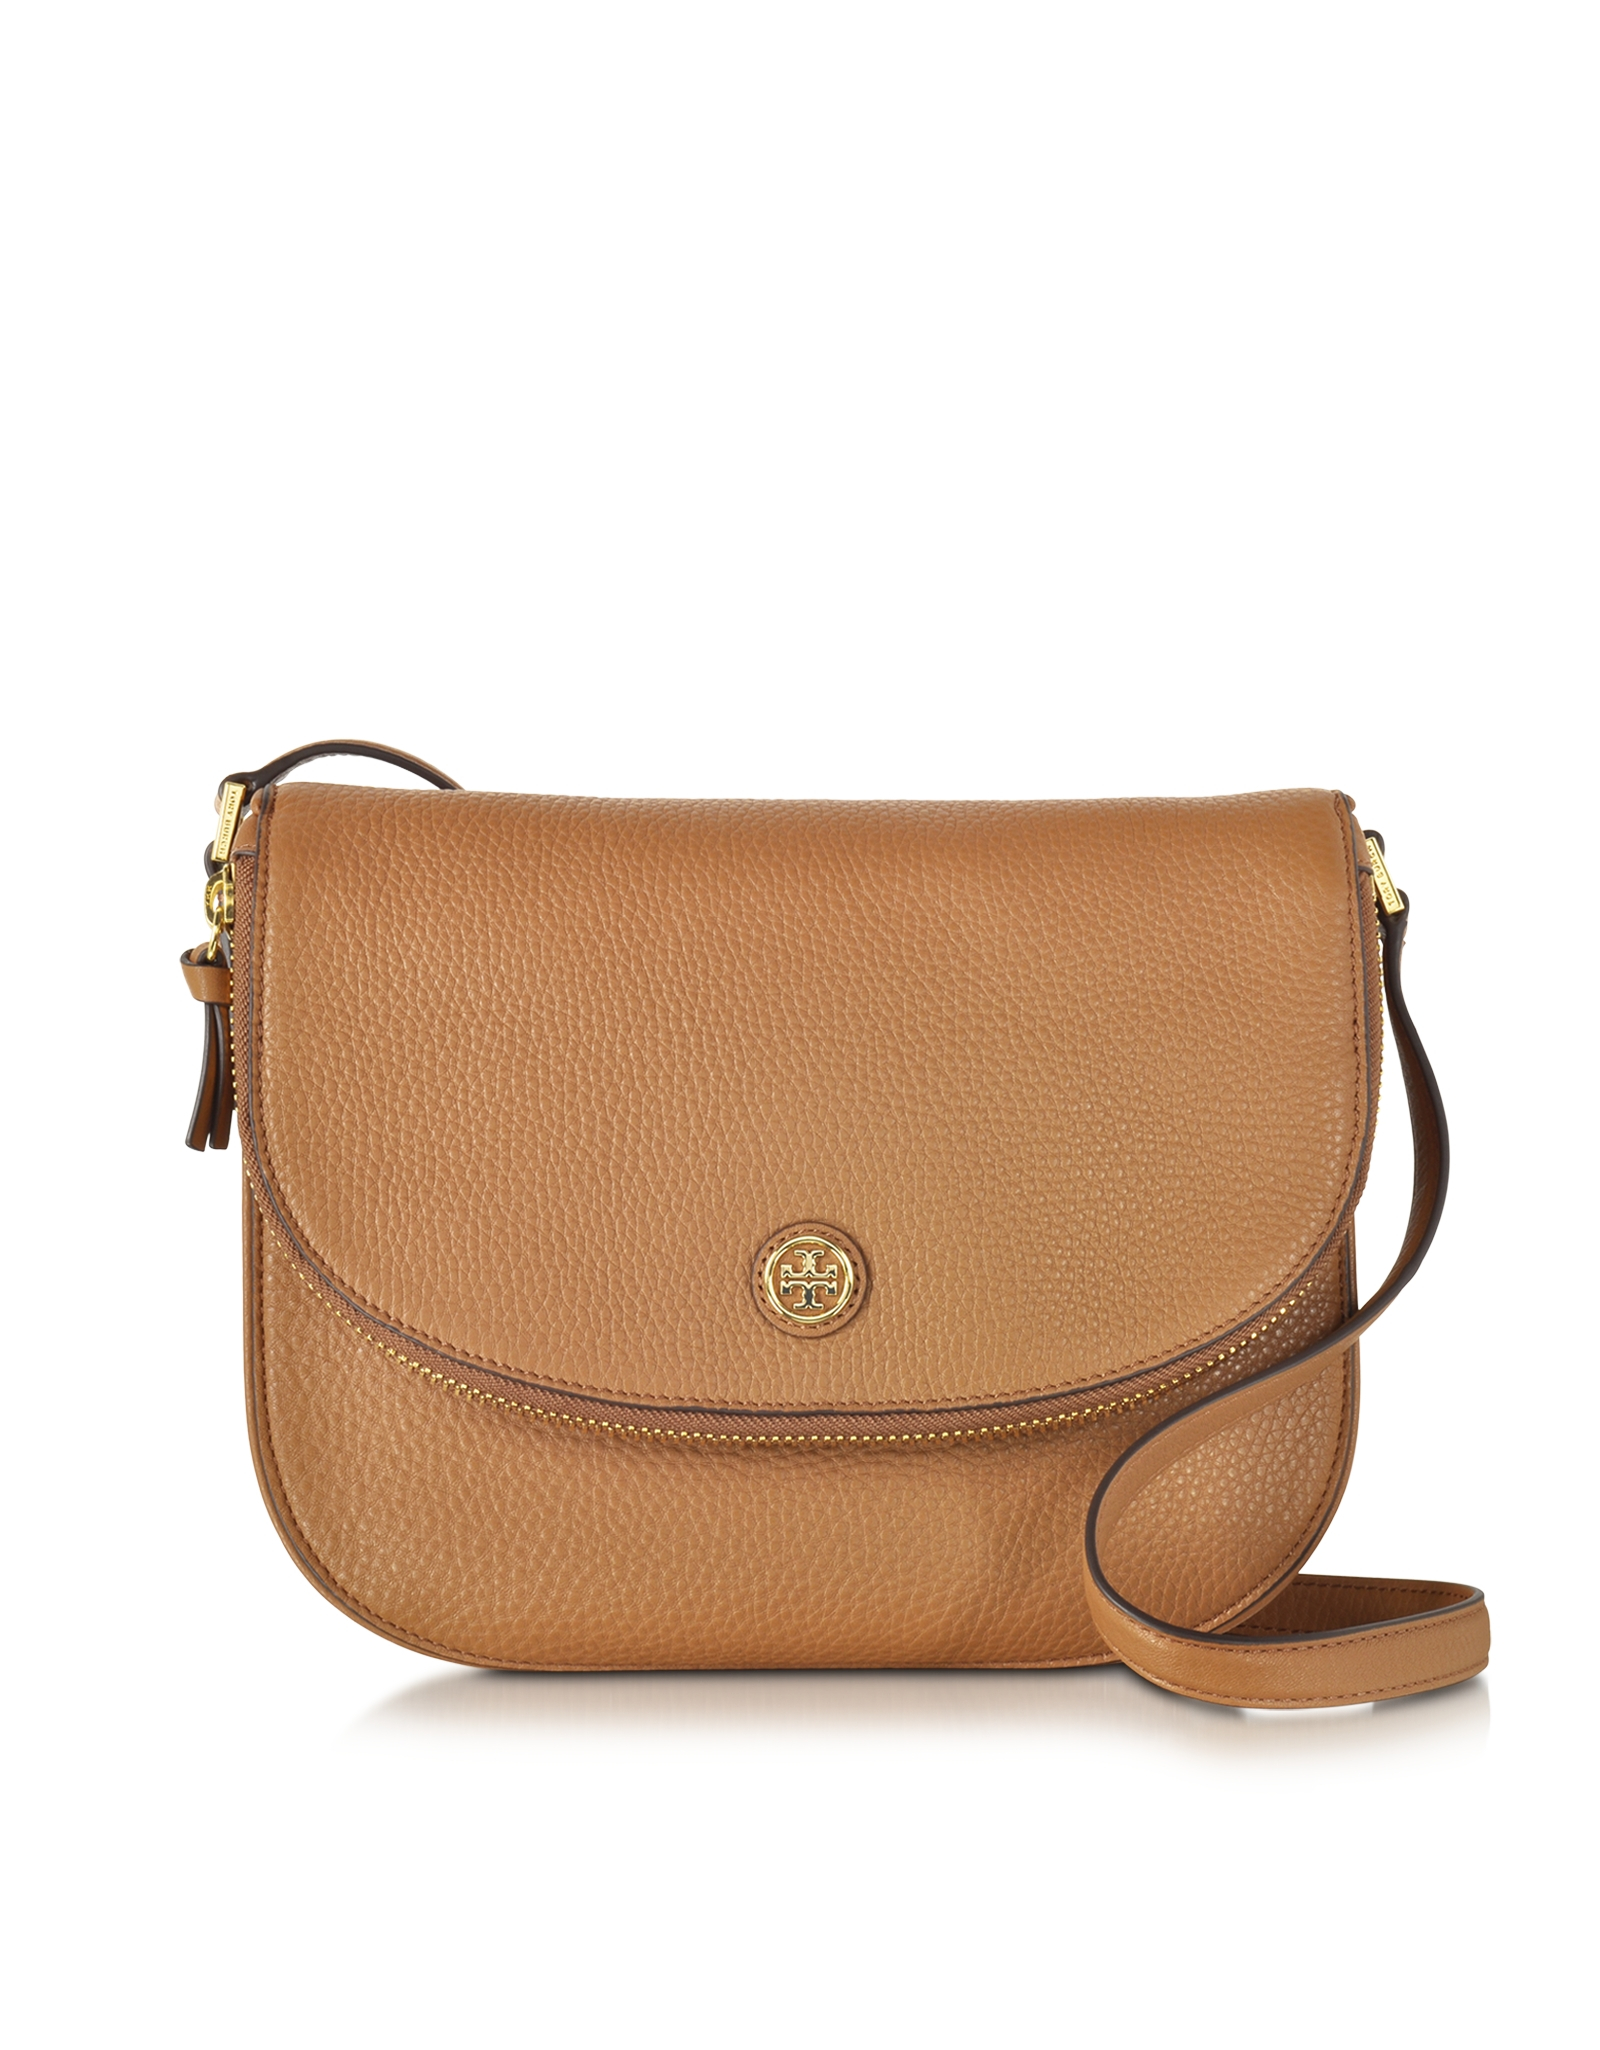 Lyst - Tory Burch Robinson Tiger Eye Pebbled Leather Messenger Bag in Brown